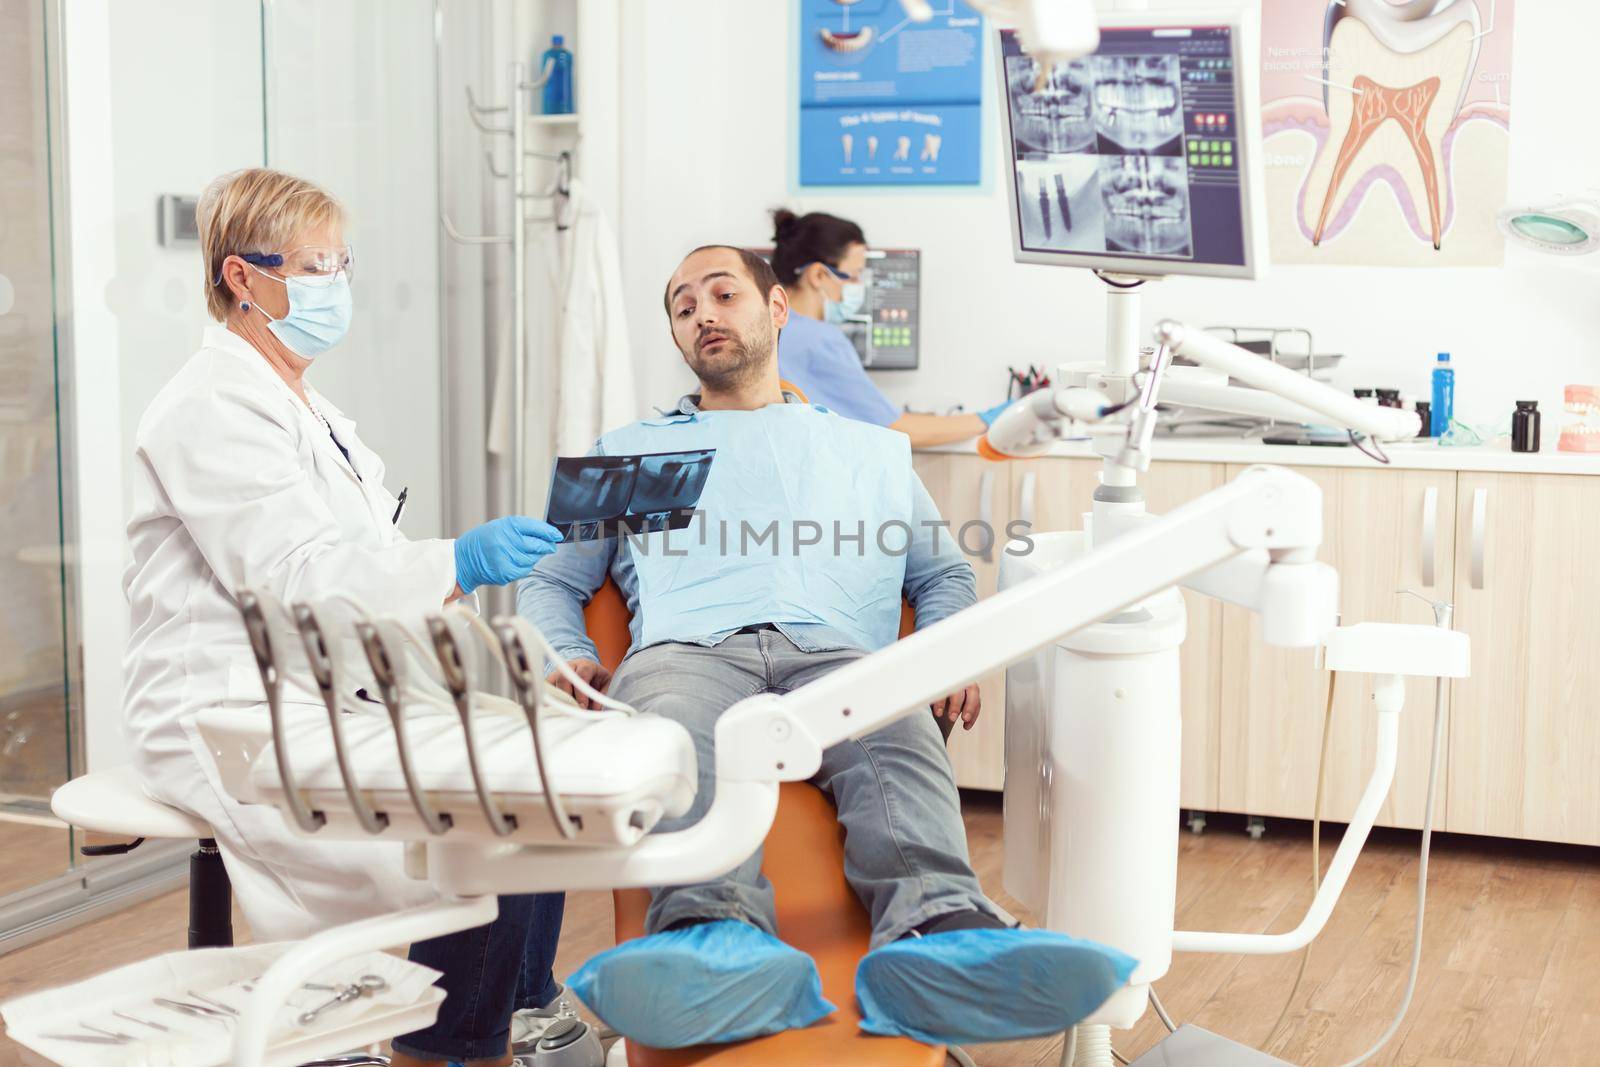 Senior woman dentist treating sick man patient in modern stomatological dentistry office by DCStudio